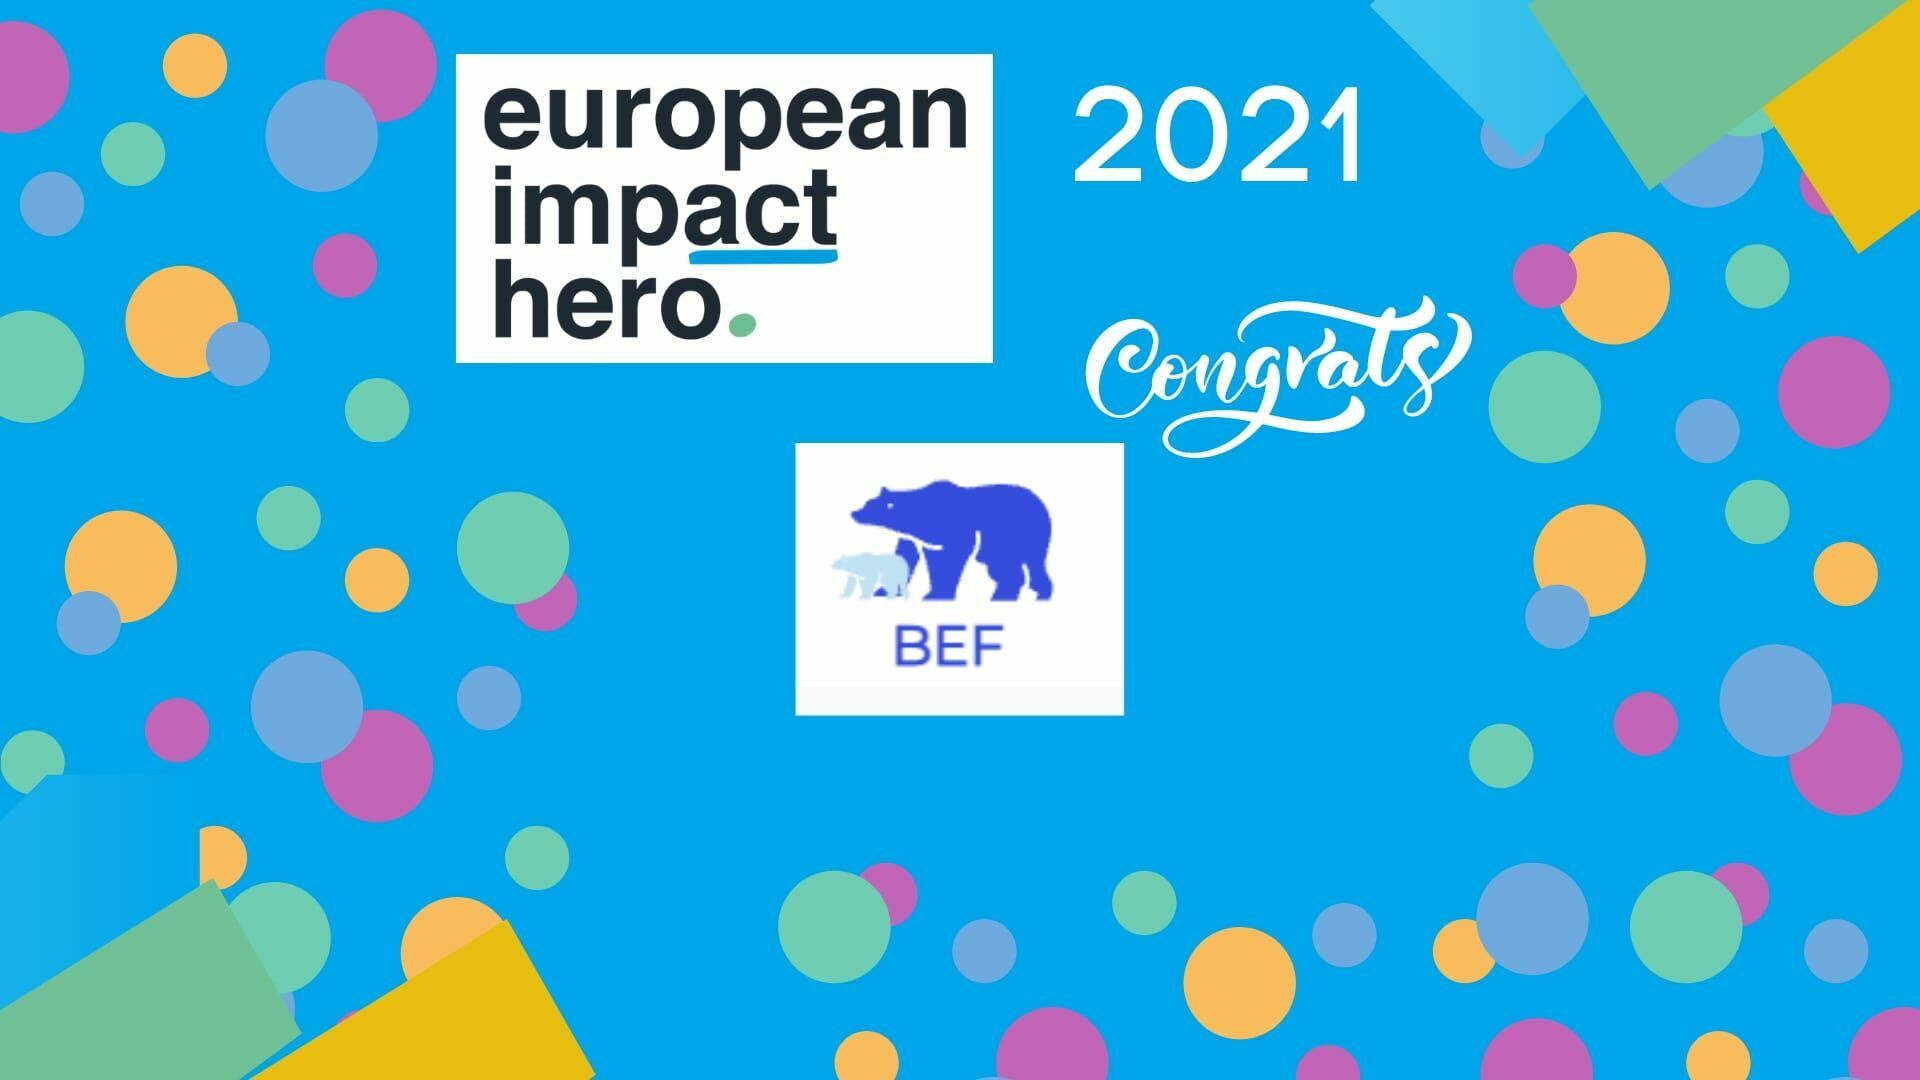 Audi employees are coaching sustainable startups: Award ceremony for the European Impact Hero